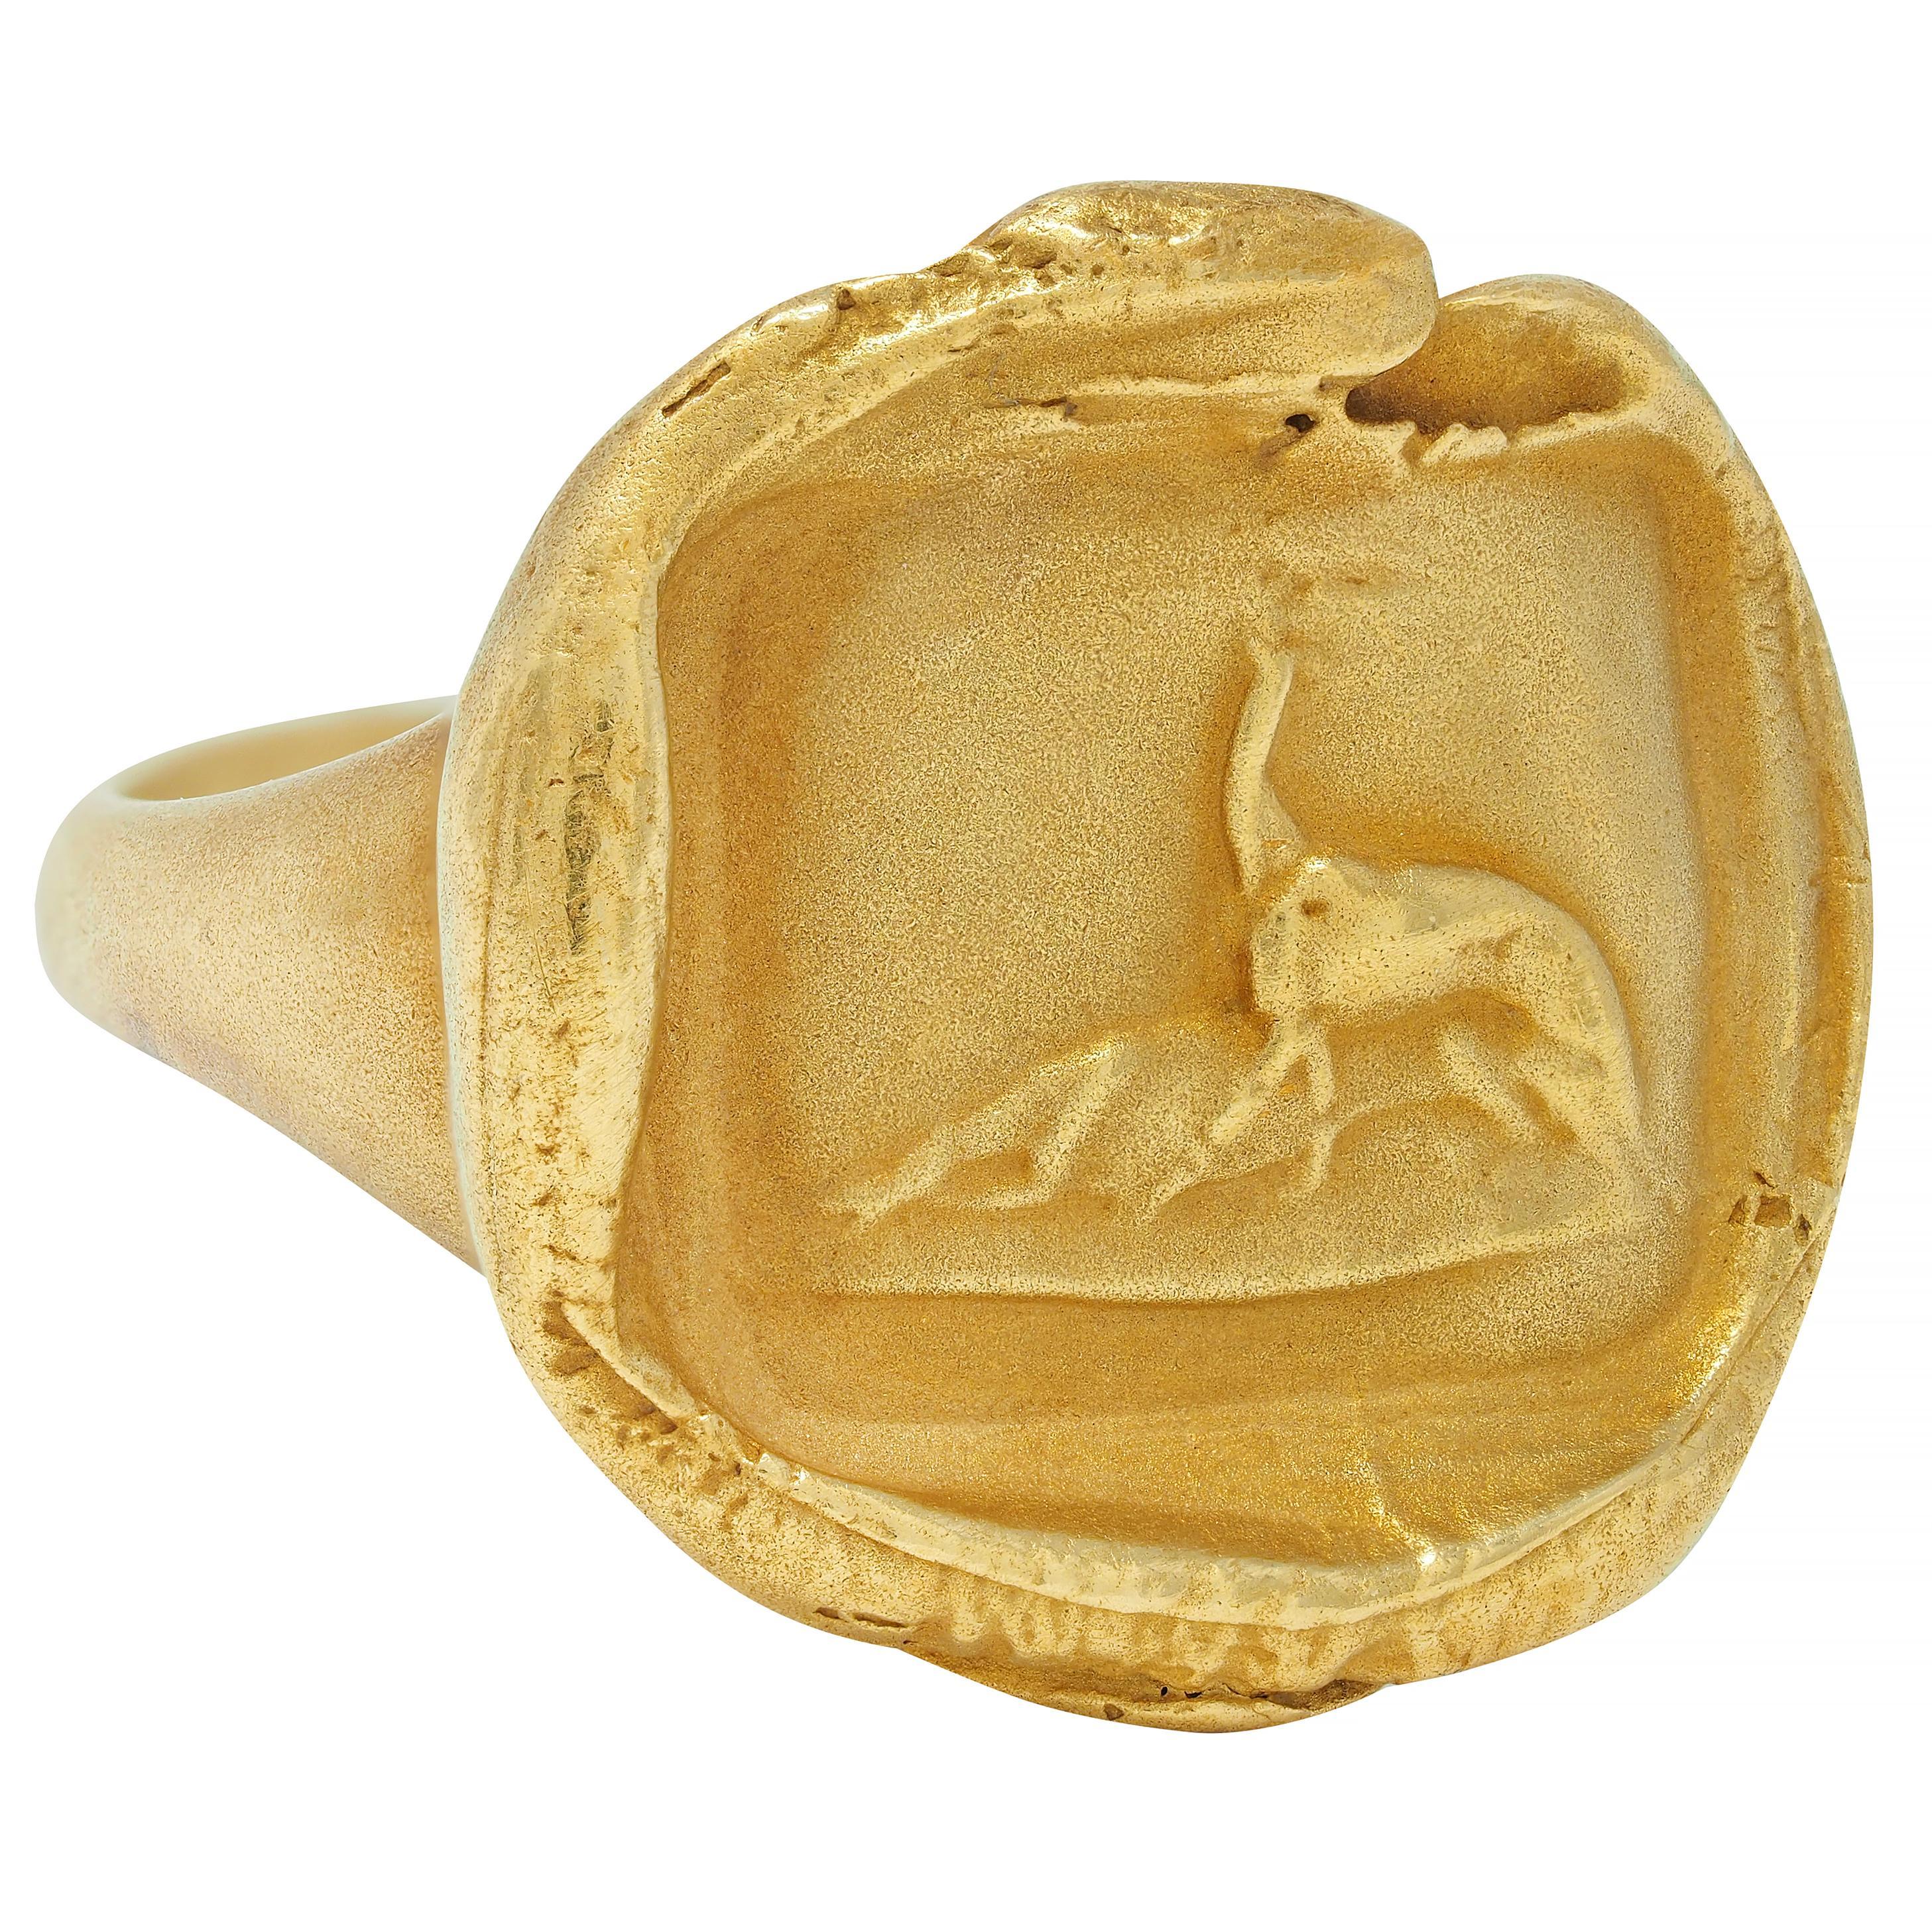 Designed as an organic cushion-shaped wax seal-like form 
Centering a raised cameo of an abstracted animal
Subtle with raised gloopy edges
Completed by flared shoulders 
Stamped for 18 karat gold 
Fully signed with maker's mark for